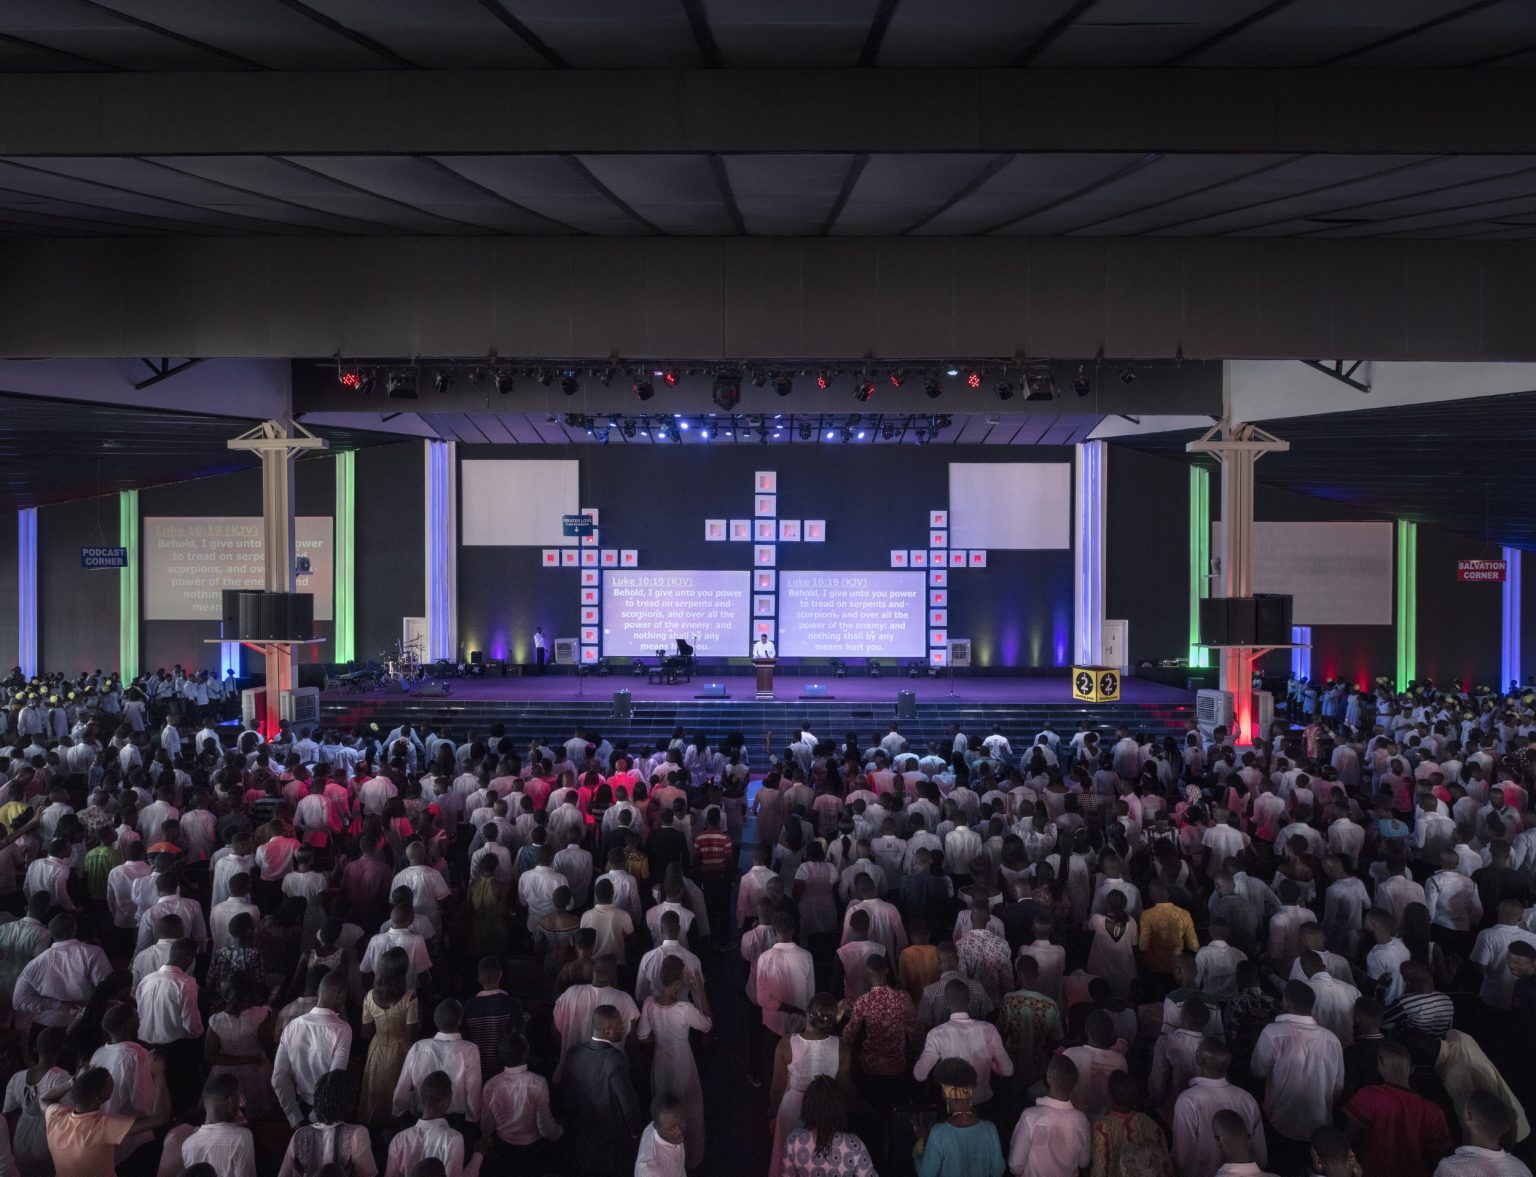 Legon (Accra), Republic of Ghana, April 2019 - Archbishop Dag Heward-Mills, founder of the Lighthouse Chapel International, during the morning service of Easter Sunday at First Love Church located in Legon. According to a Pew Research Centers report titled The Age Gap in Religion Around the World, Georgia and Ghana are the only two countries in the world where young people aged 18-39 are more religious than those aged 40 and above. Lighthouse Chapel International (LCI), founded in 1988 by Heward-Mills, is considered to be one of the leading charismatic churches in Ghana, and has over 3000 branches in over 50 countries in Africa, Europe, Asia, the Caribbean, Australia, the Middle East and the Americas. Lighthouse Chapel International is one of the largest of the Pentecostal churches that have appeared since the late 1970s in cities in Africa. ><
Legon (Accra), Grande Regione di Accra, Repubblica del Ghana, aprile 2019 - Il Vescovo Dag Heward - Mills, fondatore della Lighthouse Chapel International, durante il servizio mattutino della domenica di Pasqua presso il First Love Centre, situato nel sobborgo di Legon. Secondo un rapporto del Pew Research Center intitolato "The Age Gap in Religion Around the World", Georgia e Ghana sono gli unici due paesi al mondo in cui i giovani tra i 18 ei 39 anni sono più religiosi di quelli di 40 anni e oltre. Lighthouse Chapel International (LCI), fondata nel 1988 da Dag Heward-Mills, è considerata una delle principali chiese carismatiche del Ghana e conta oltre 3000 filiali in oltre 50 paesi in Africa, Europa, Asia, i Caraibi, l'Australia, il Medio Oriente e le Americhe. Lighthouse Chapel International è una delle più grandi chiese pentecostali apparse dalla fine degli anni '70 nelle città dell'Africa.